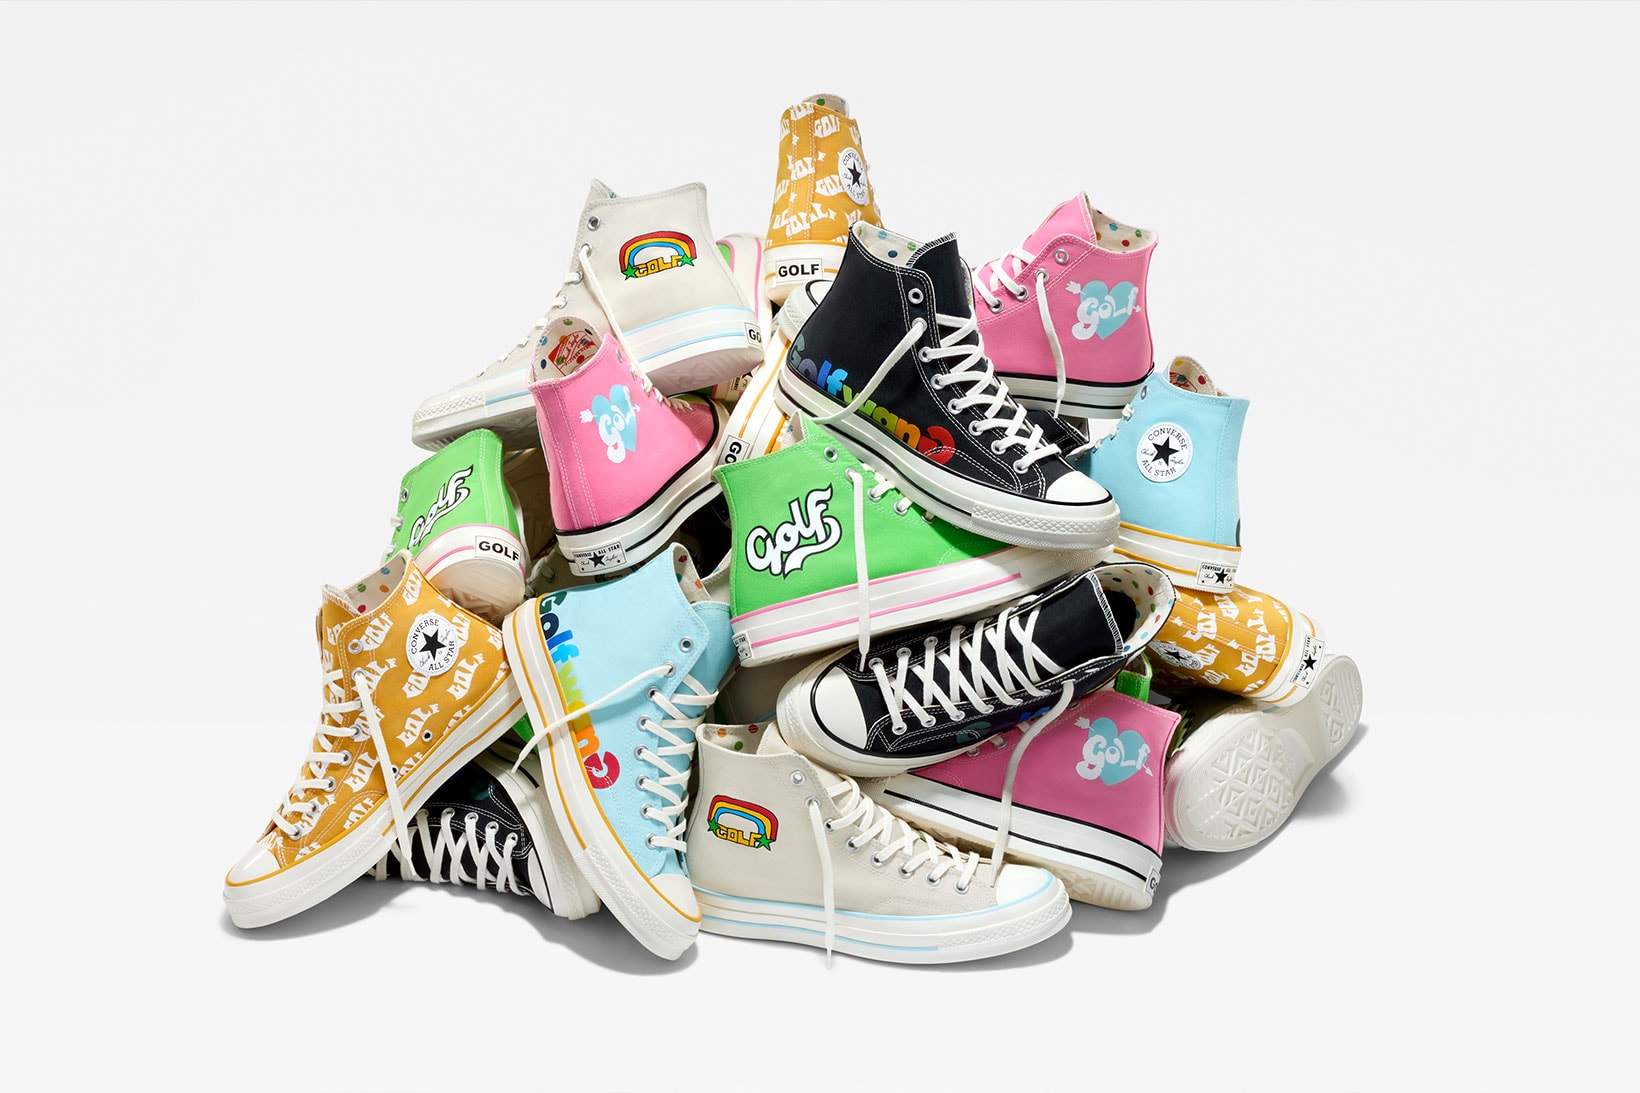 Just press play. Wear your heart on your shoes with the Converse x